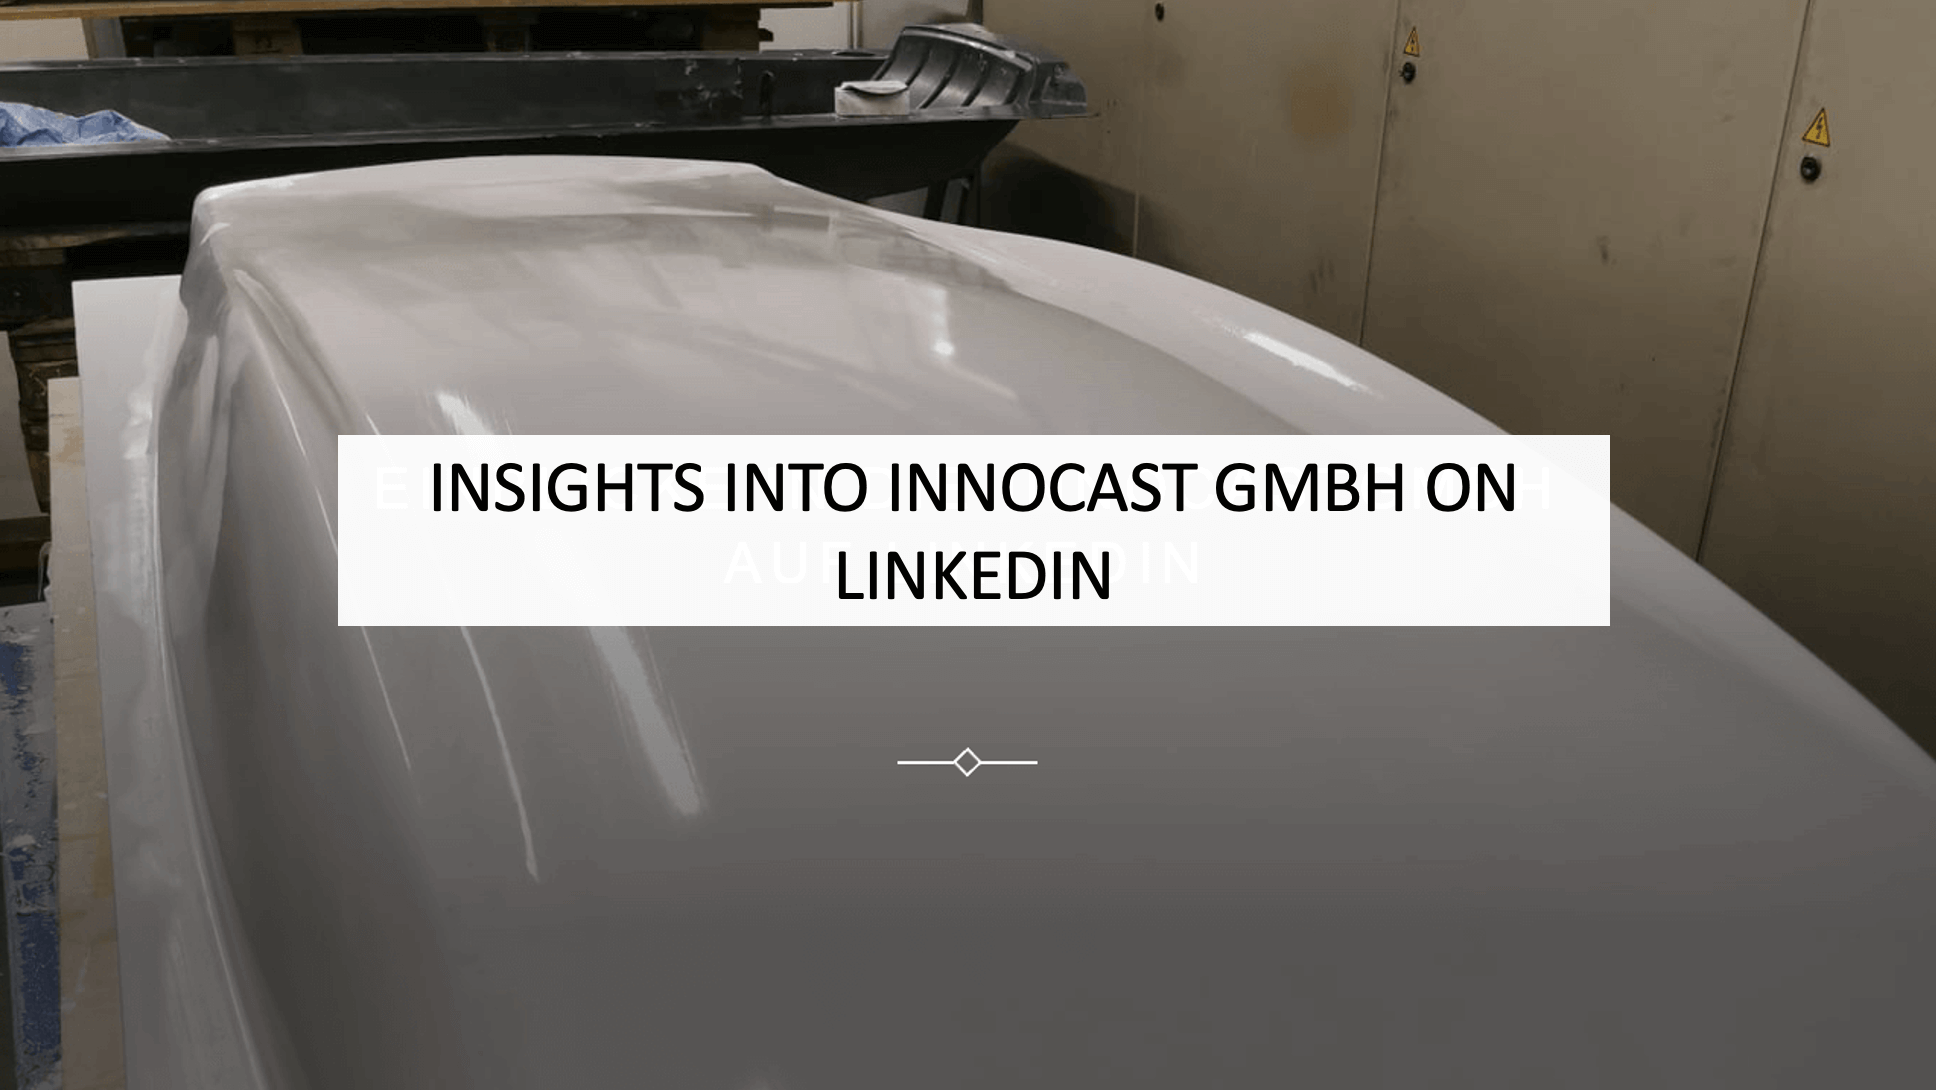 LinkedIn: Exciting insights into InnoCast GmbH